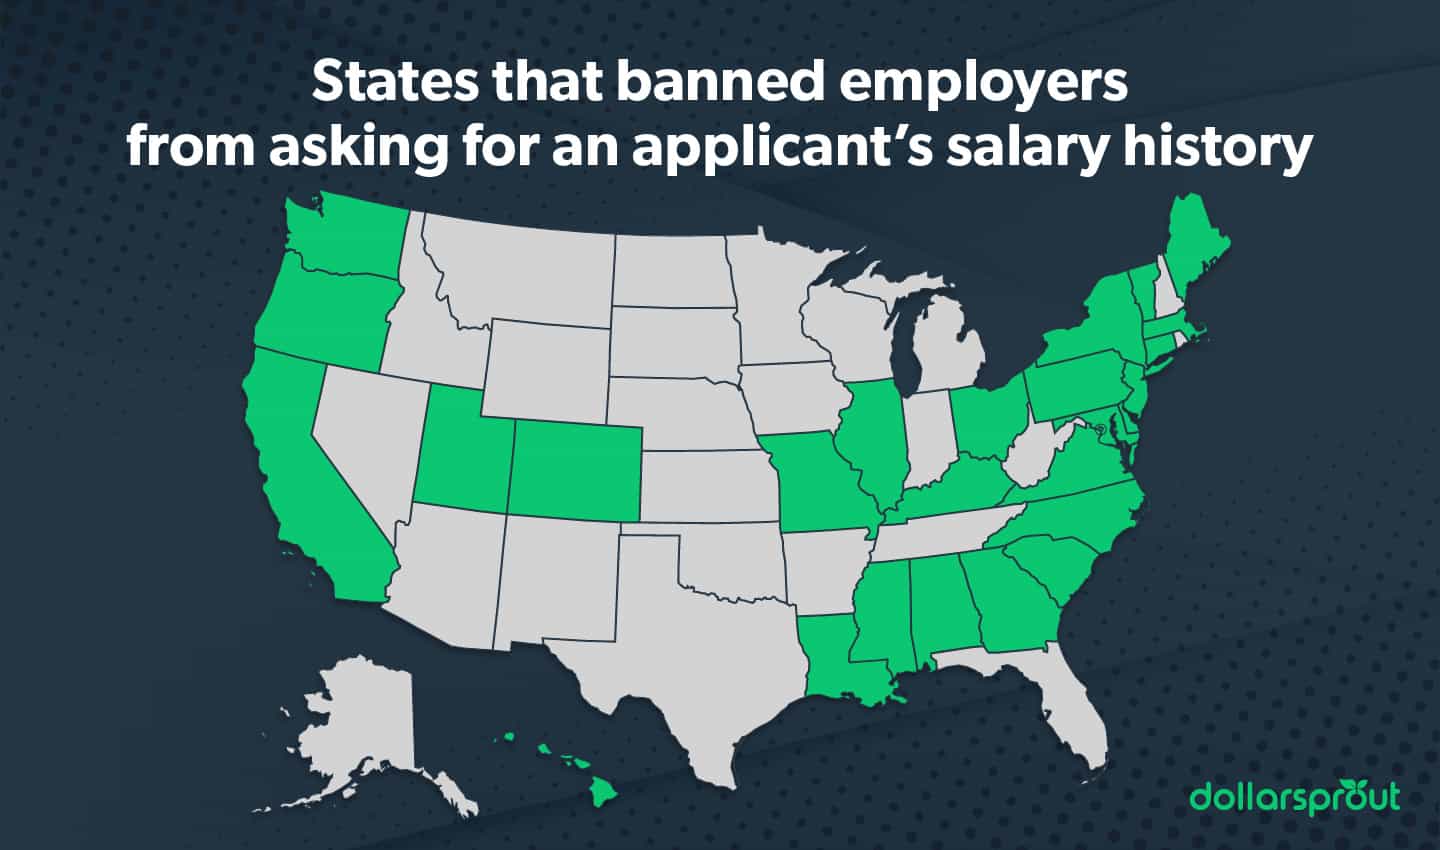 States that banned employers from asking for salary history